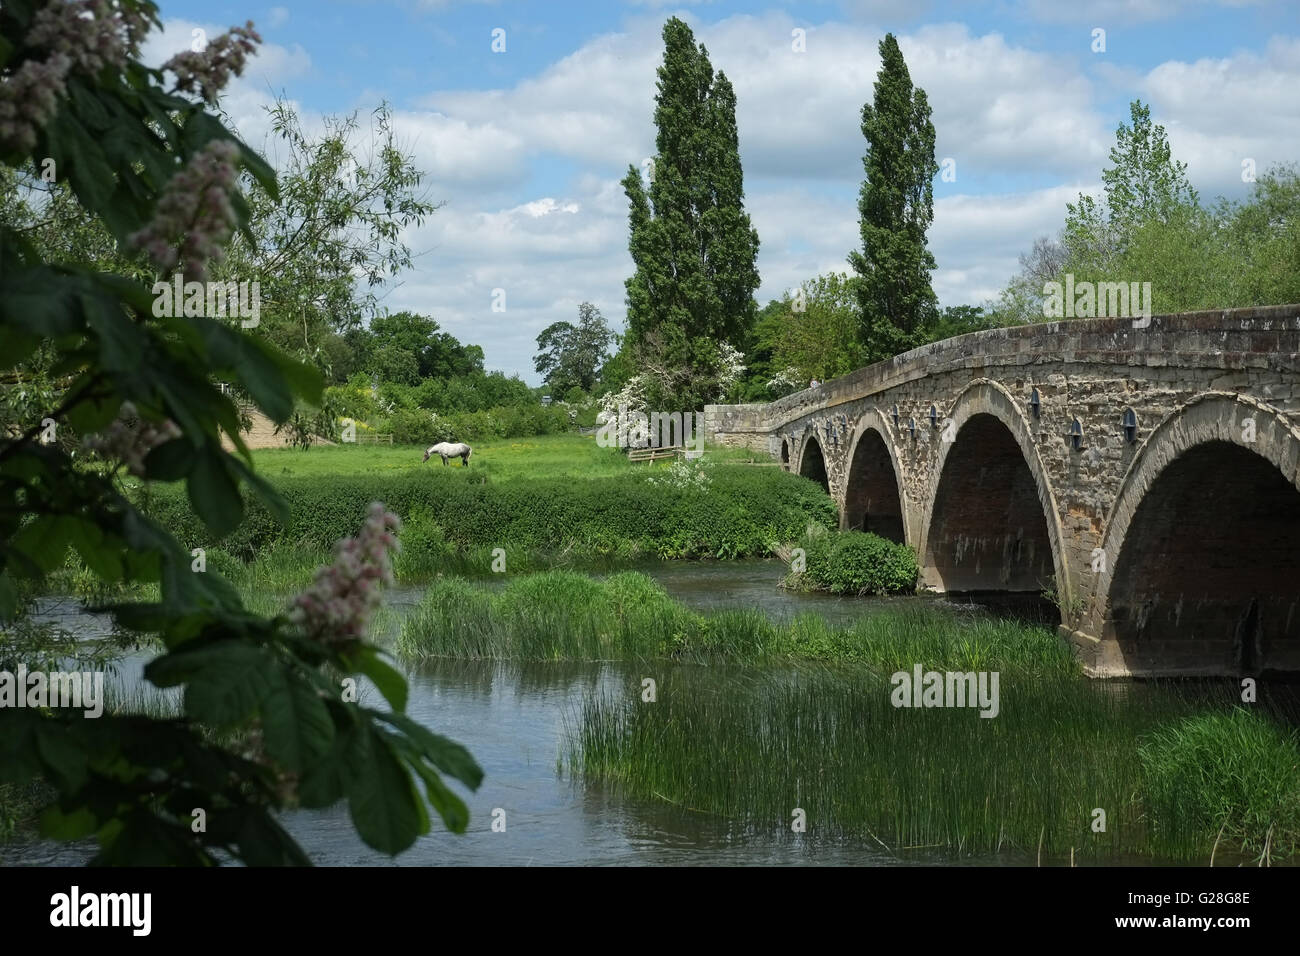 The old bridge over the River Avon at Barford, Warwickshire, England, UK. Stock Photo